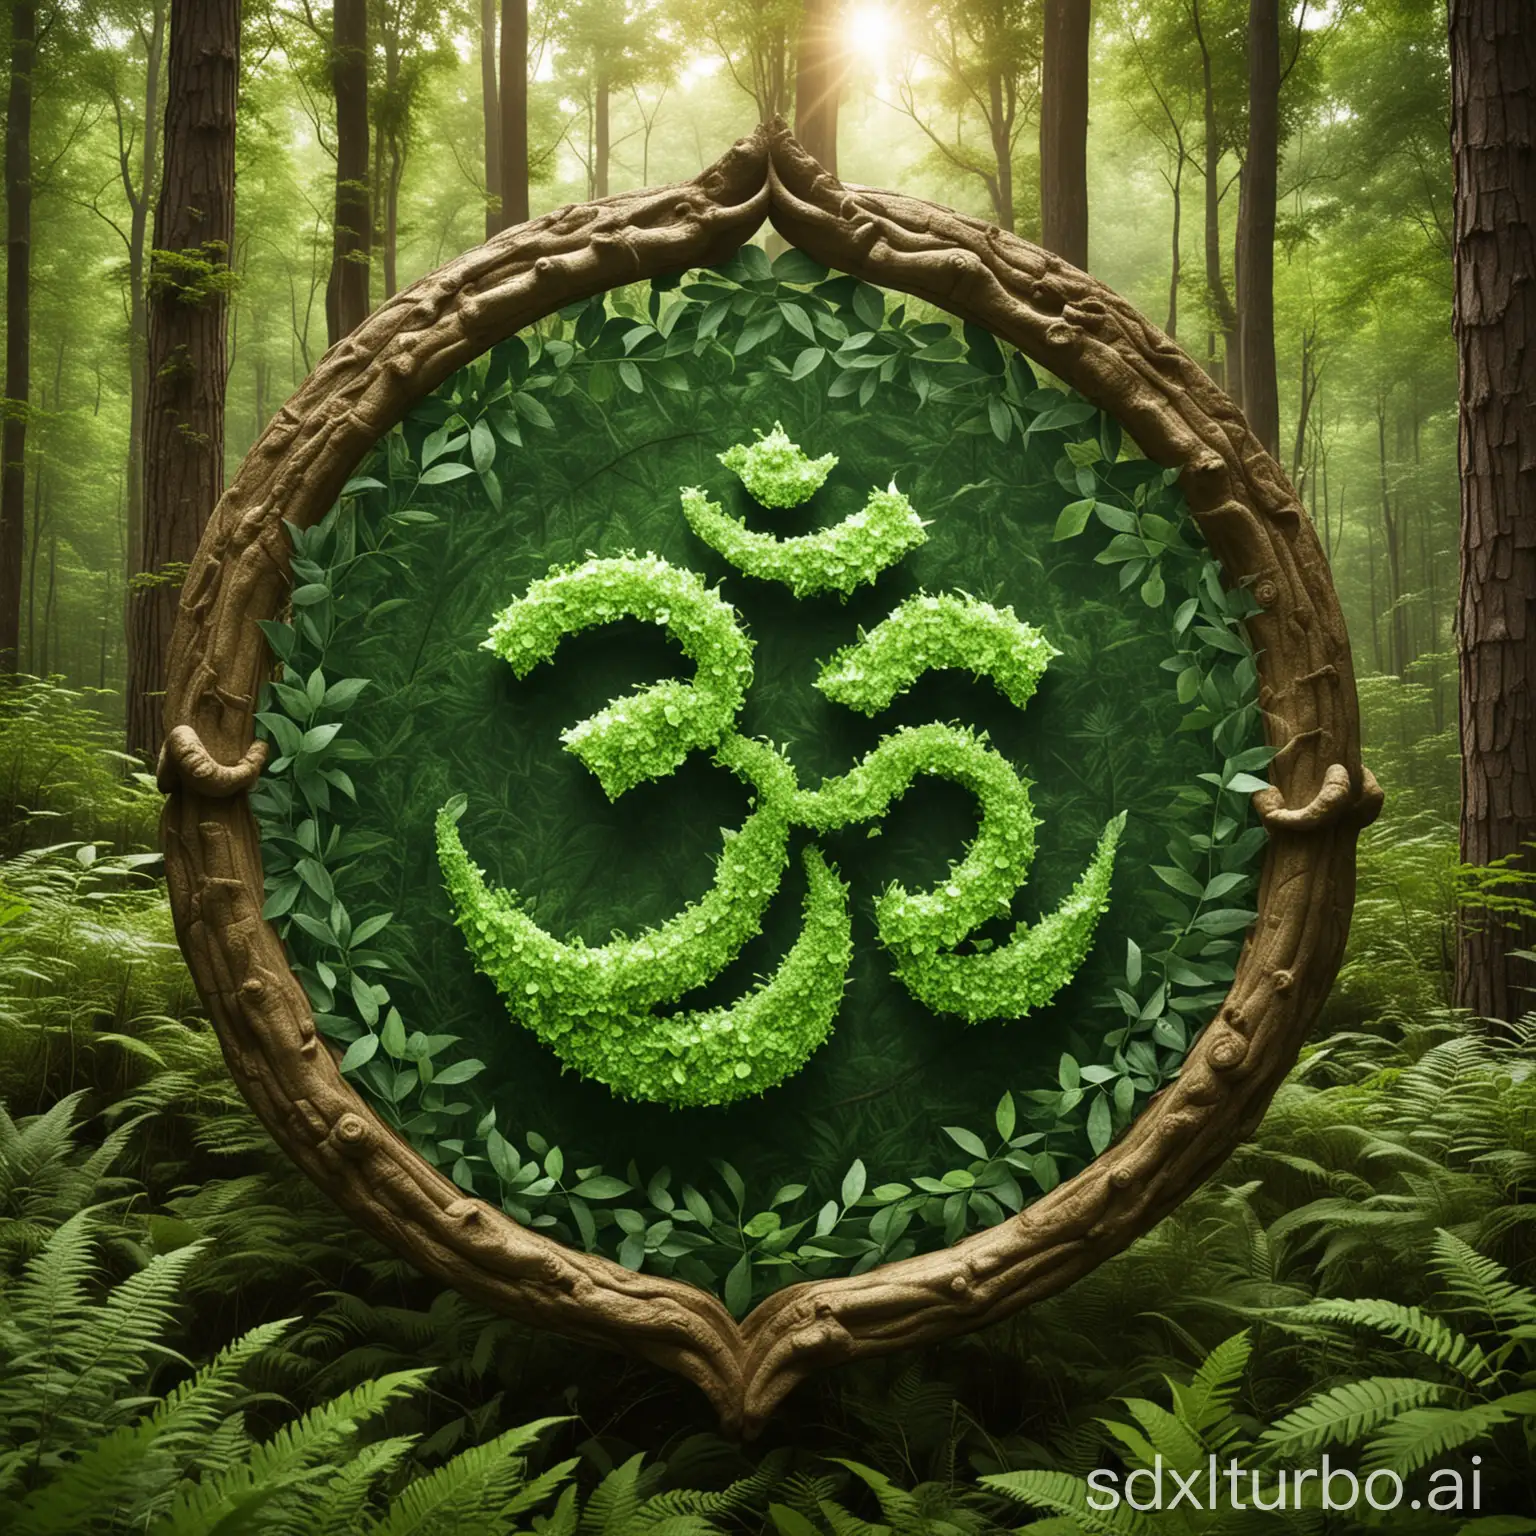 Om symbol surrounded by forest green